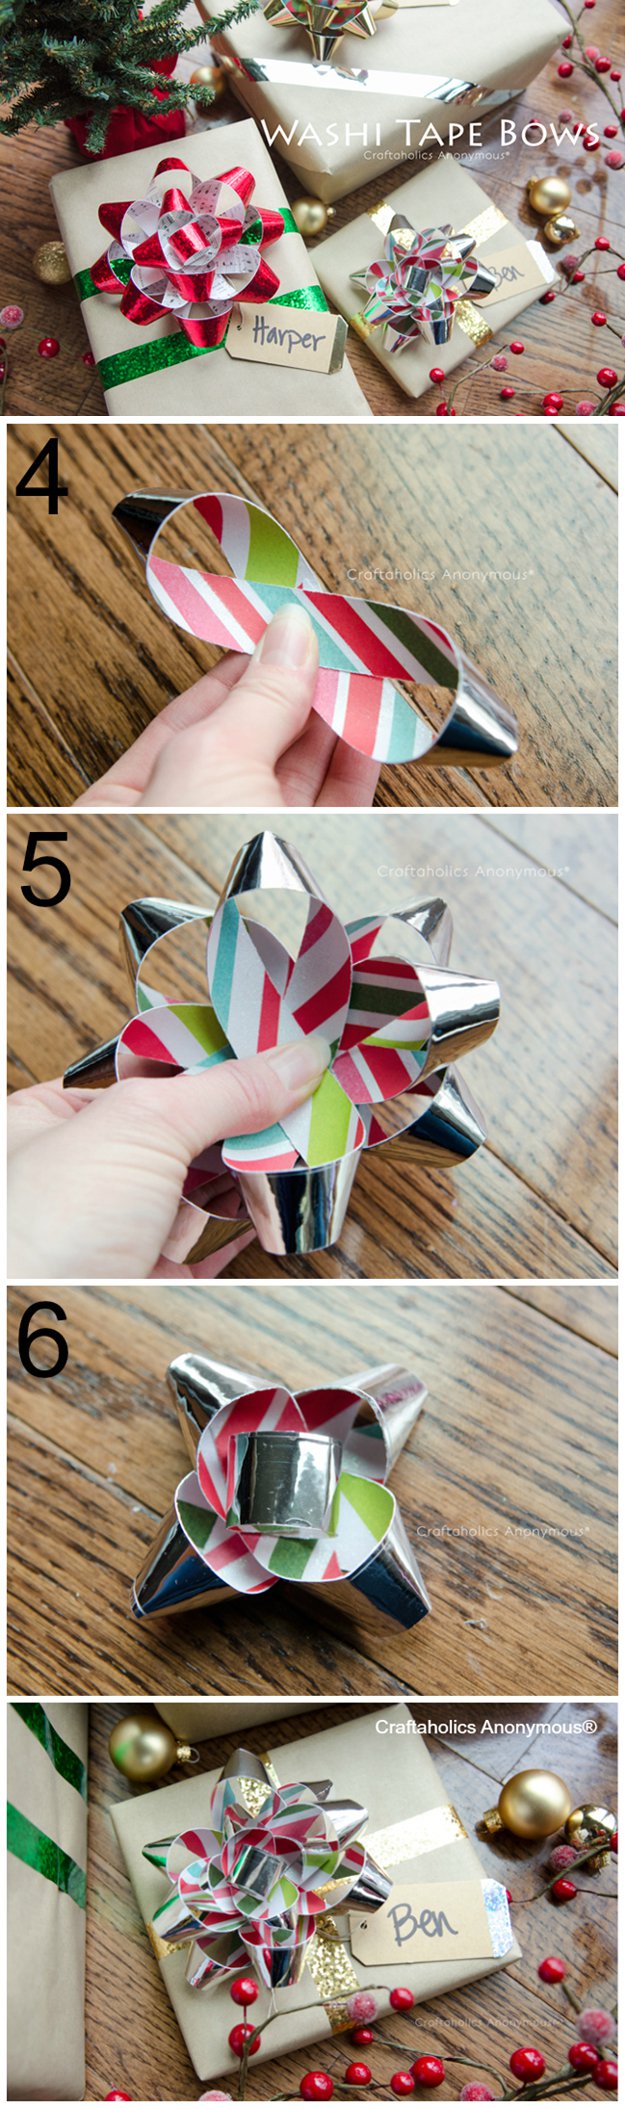 Washi Tape Crafts - Washi Tape Gift Bows Tutorial - Wall Art, Frames, Cards, Pencils, Room Decor and DIY Gifts, Back To School Supplies - Creative, Fun Craft Ideas for Teens, Tweens and Teenagers - Step by Step Tutorials and Instructions #washitape #crafts #cheapcrafts #teencrafts